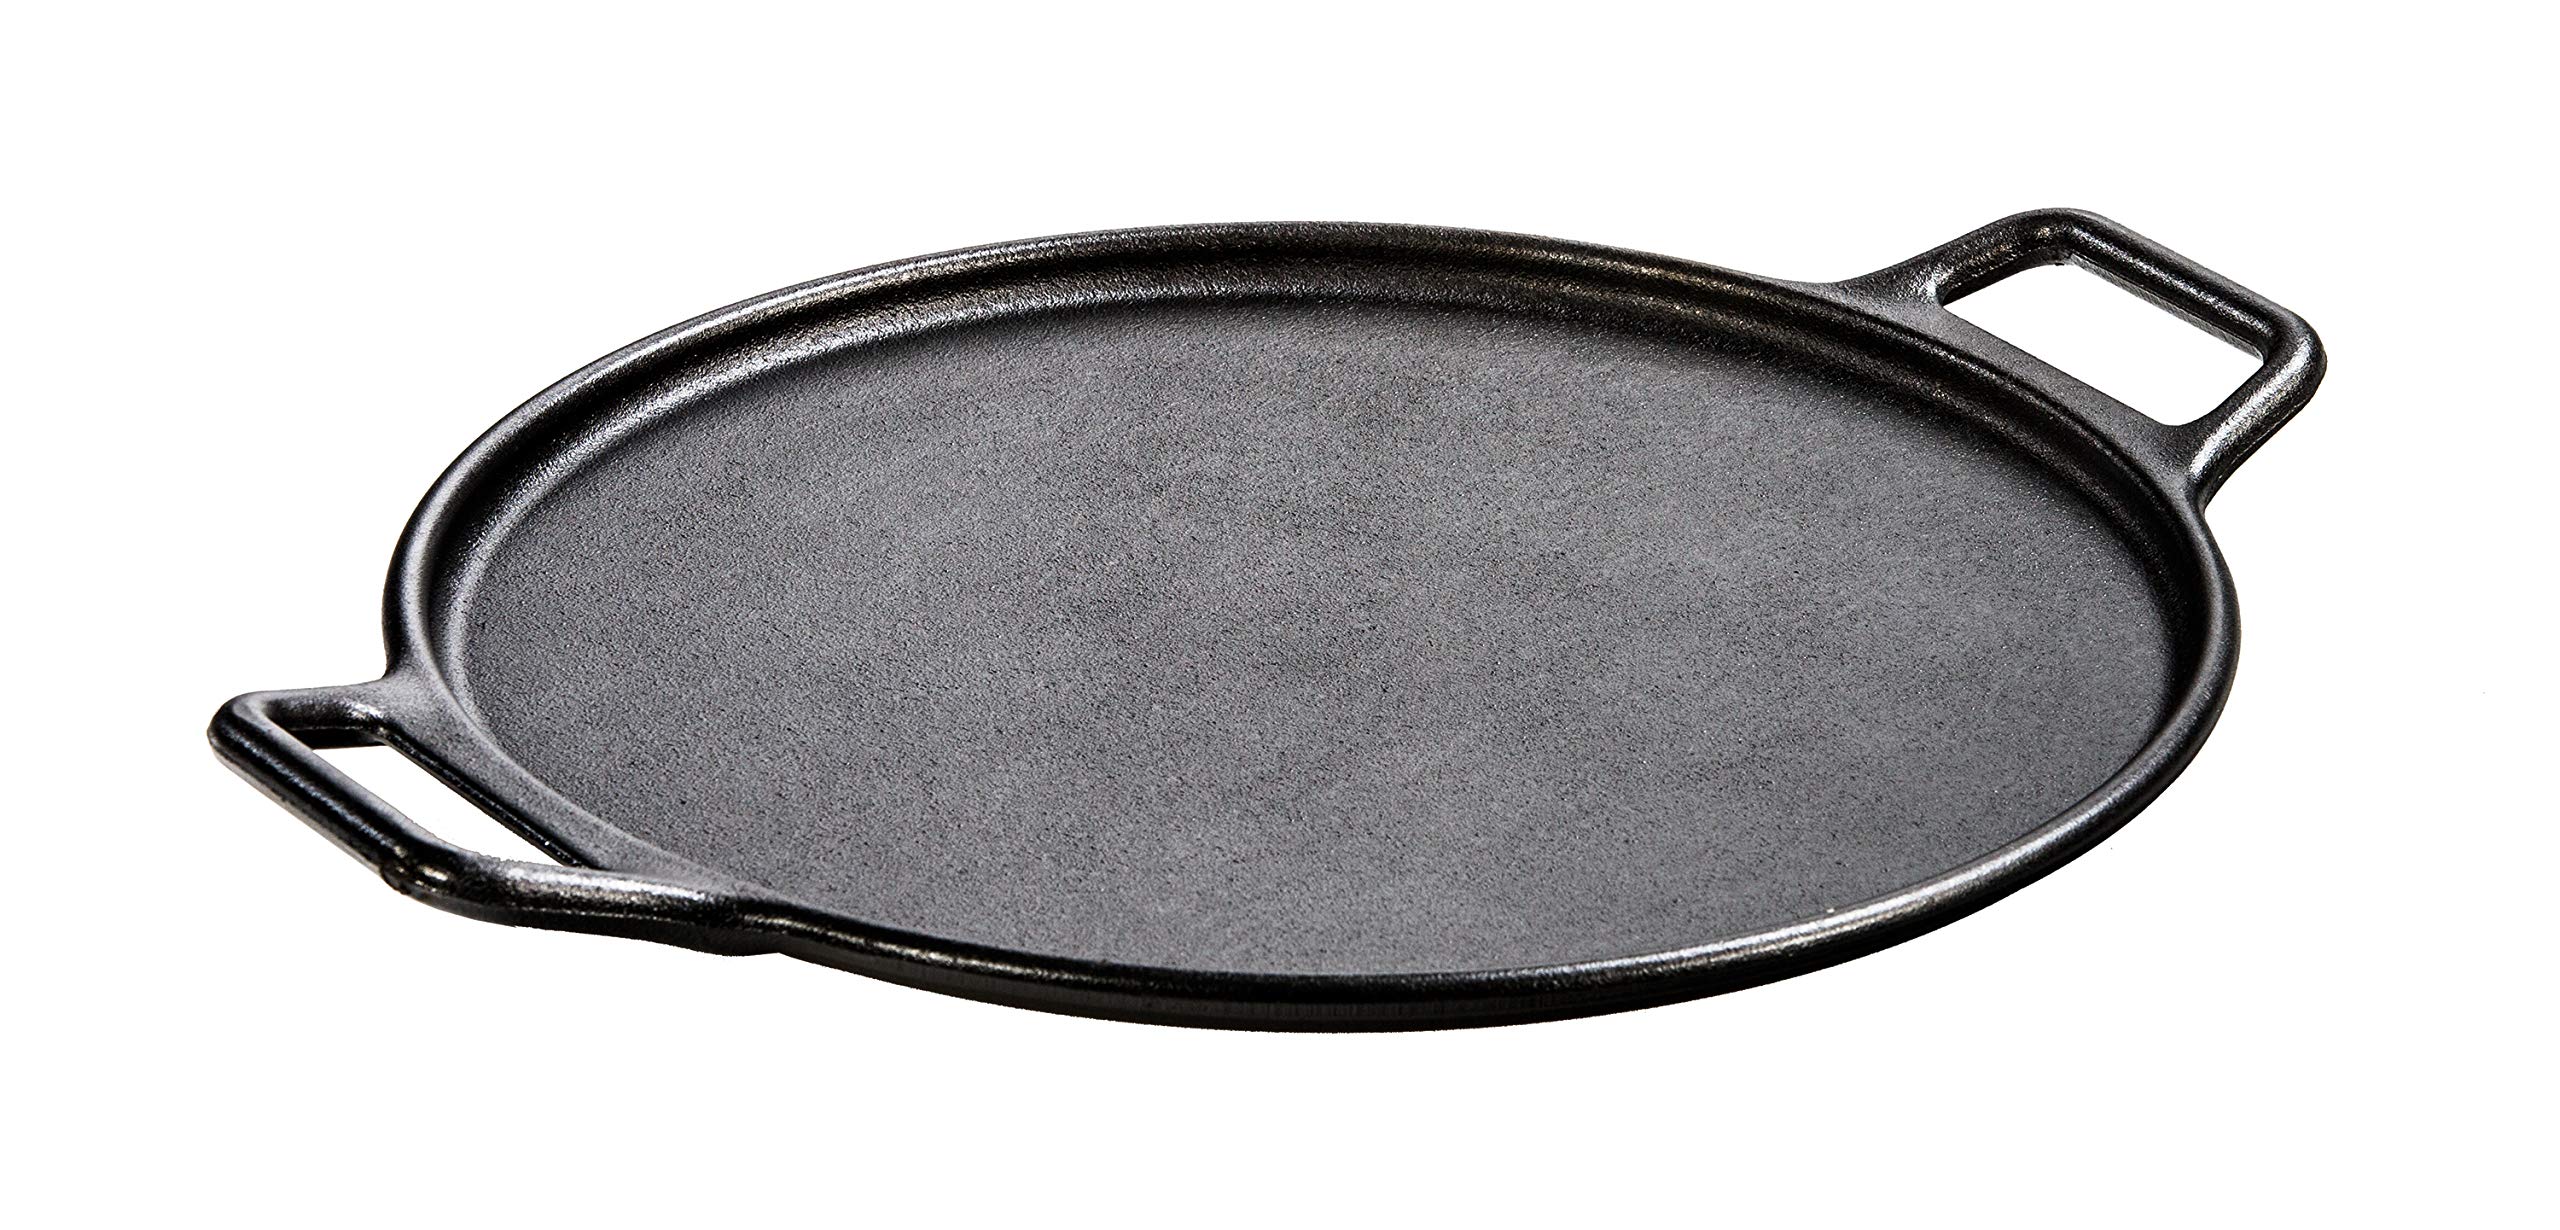 Lodge 14 Inch Cast Iron Pizza Pan and 17 Inch Cast Iron Skillet Bundle